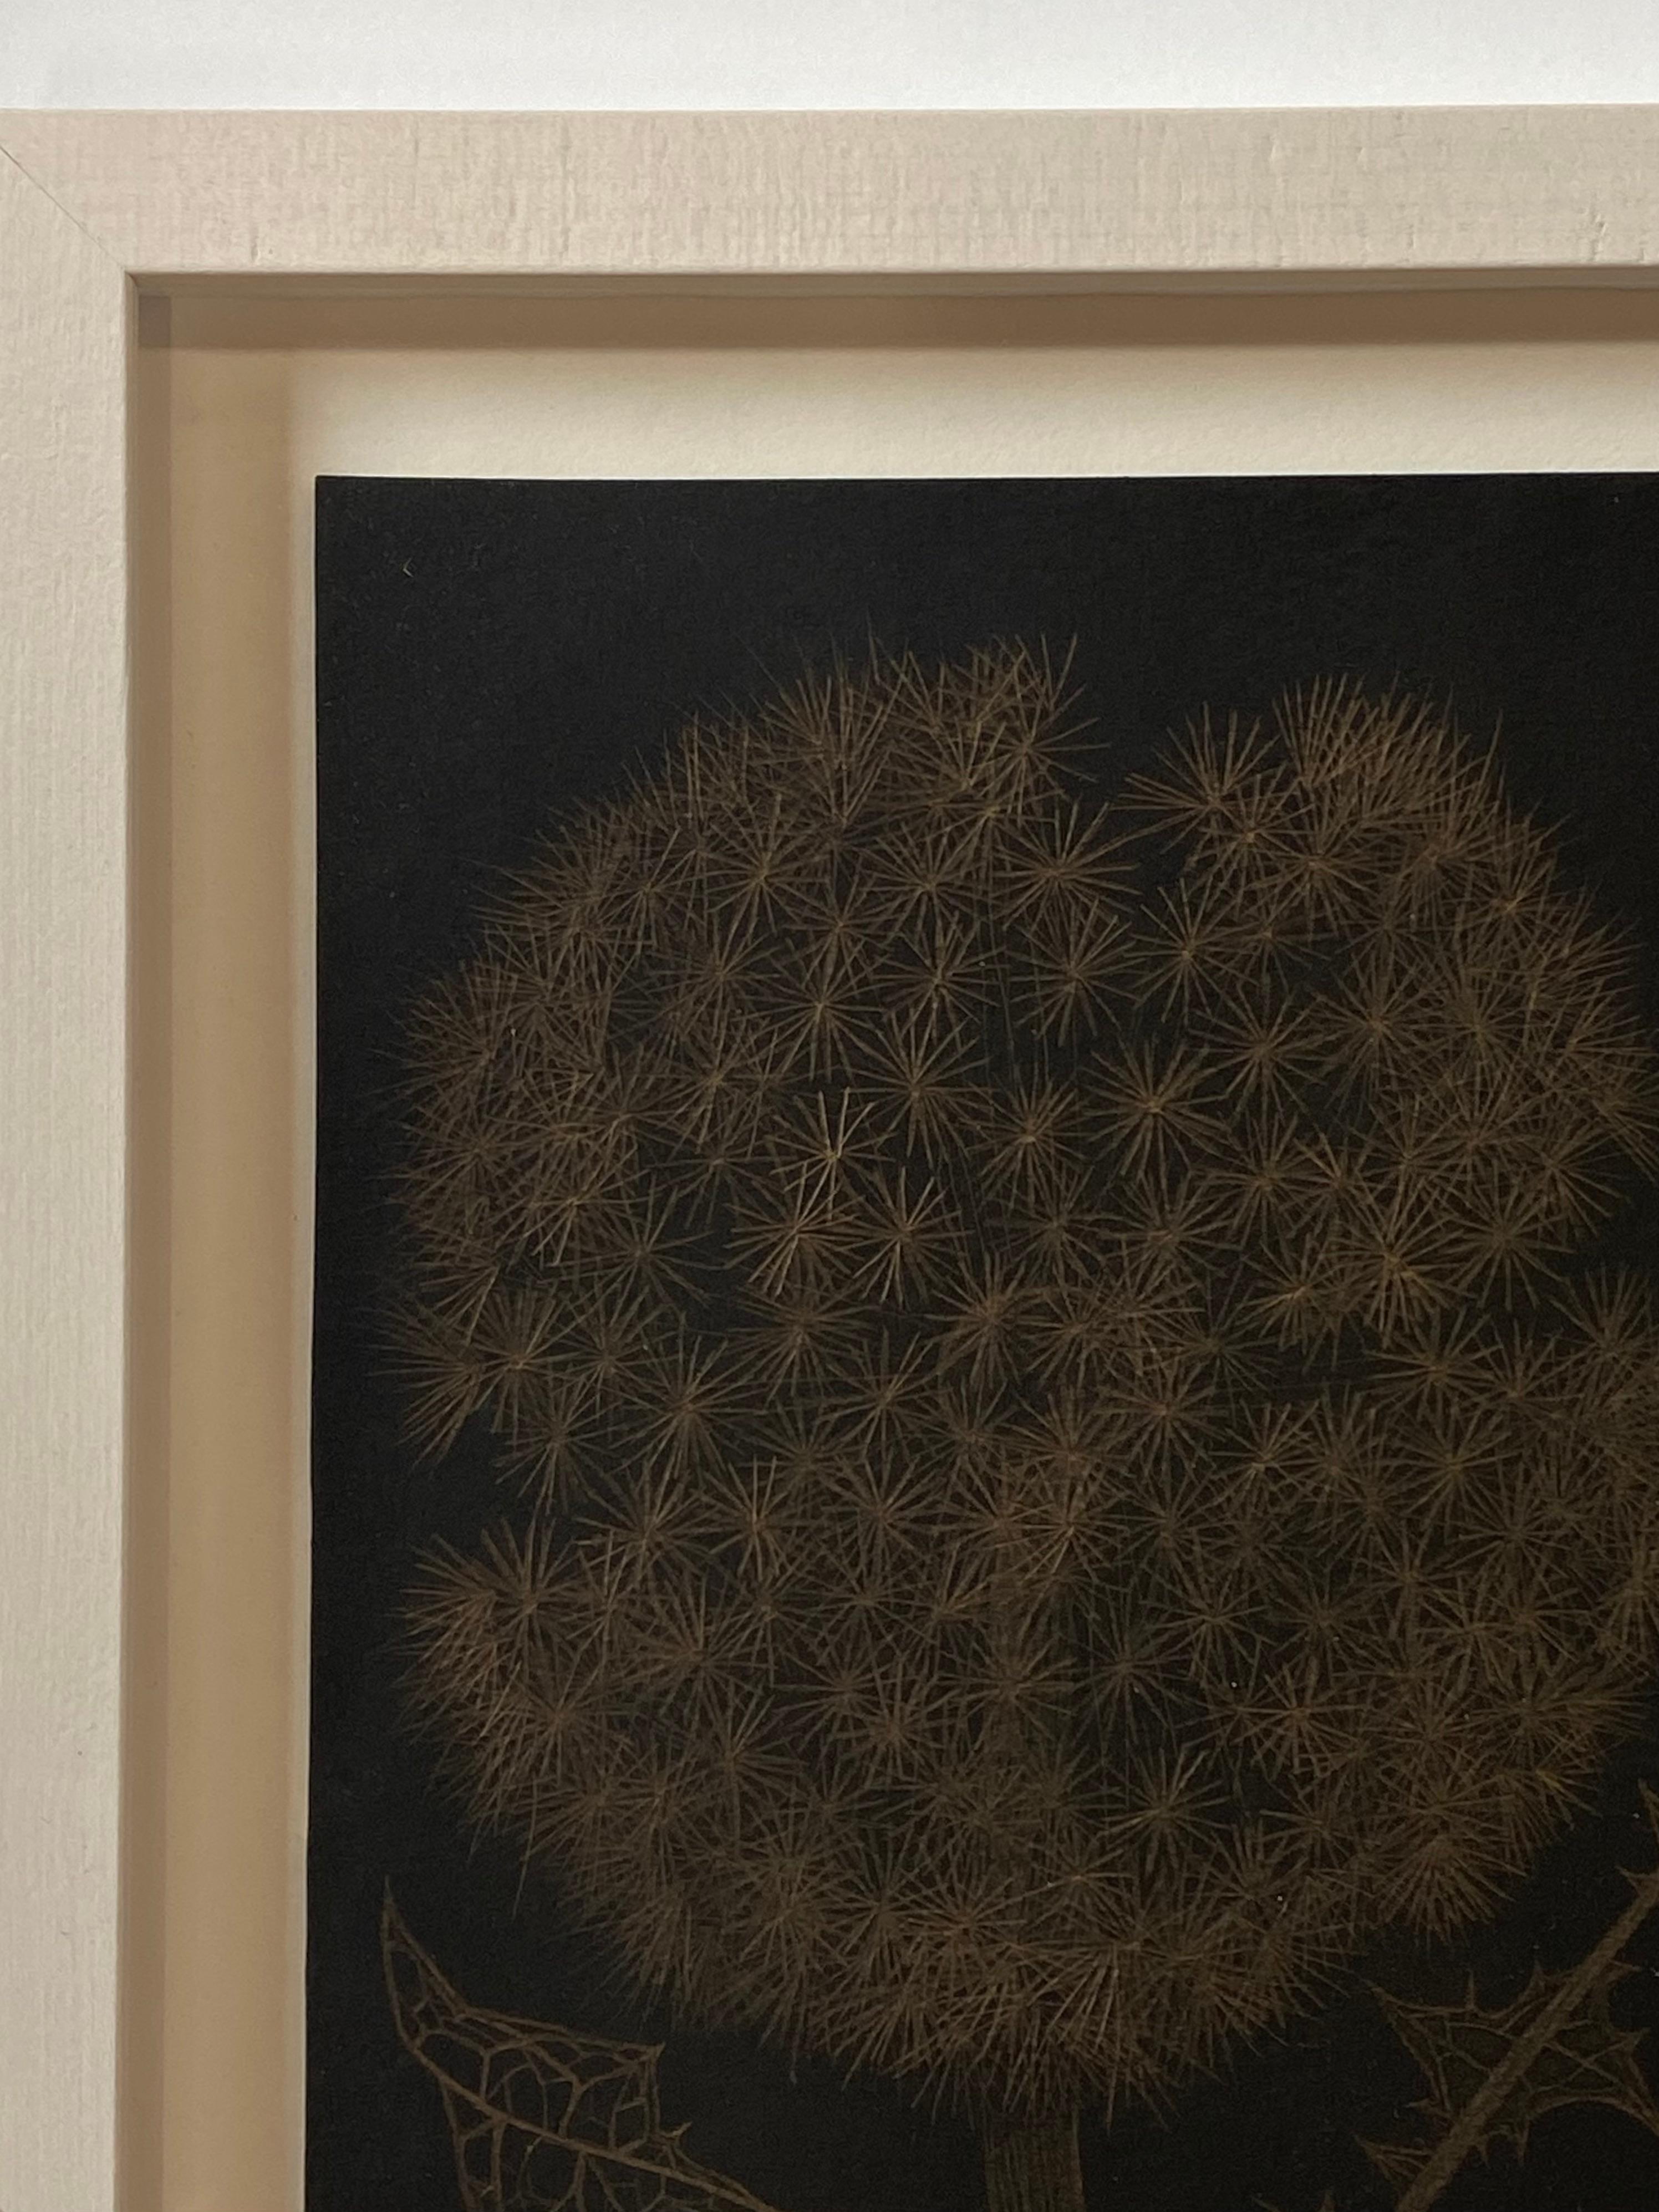 Dandelion with Two Buds, Metallic Gold Botanical Drawing, Black Paper - Contemporary Art by Margot Glass